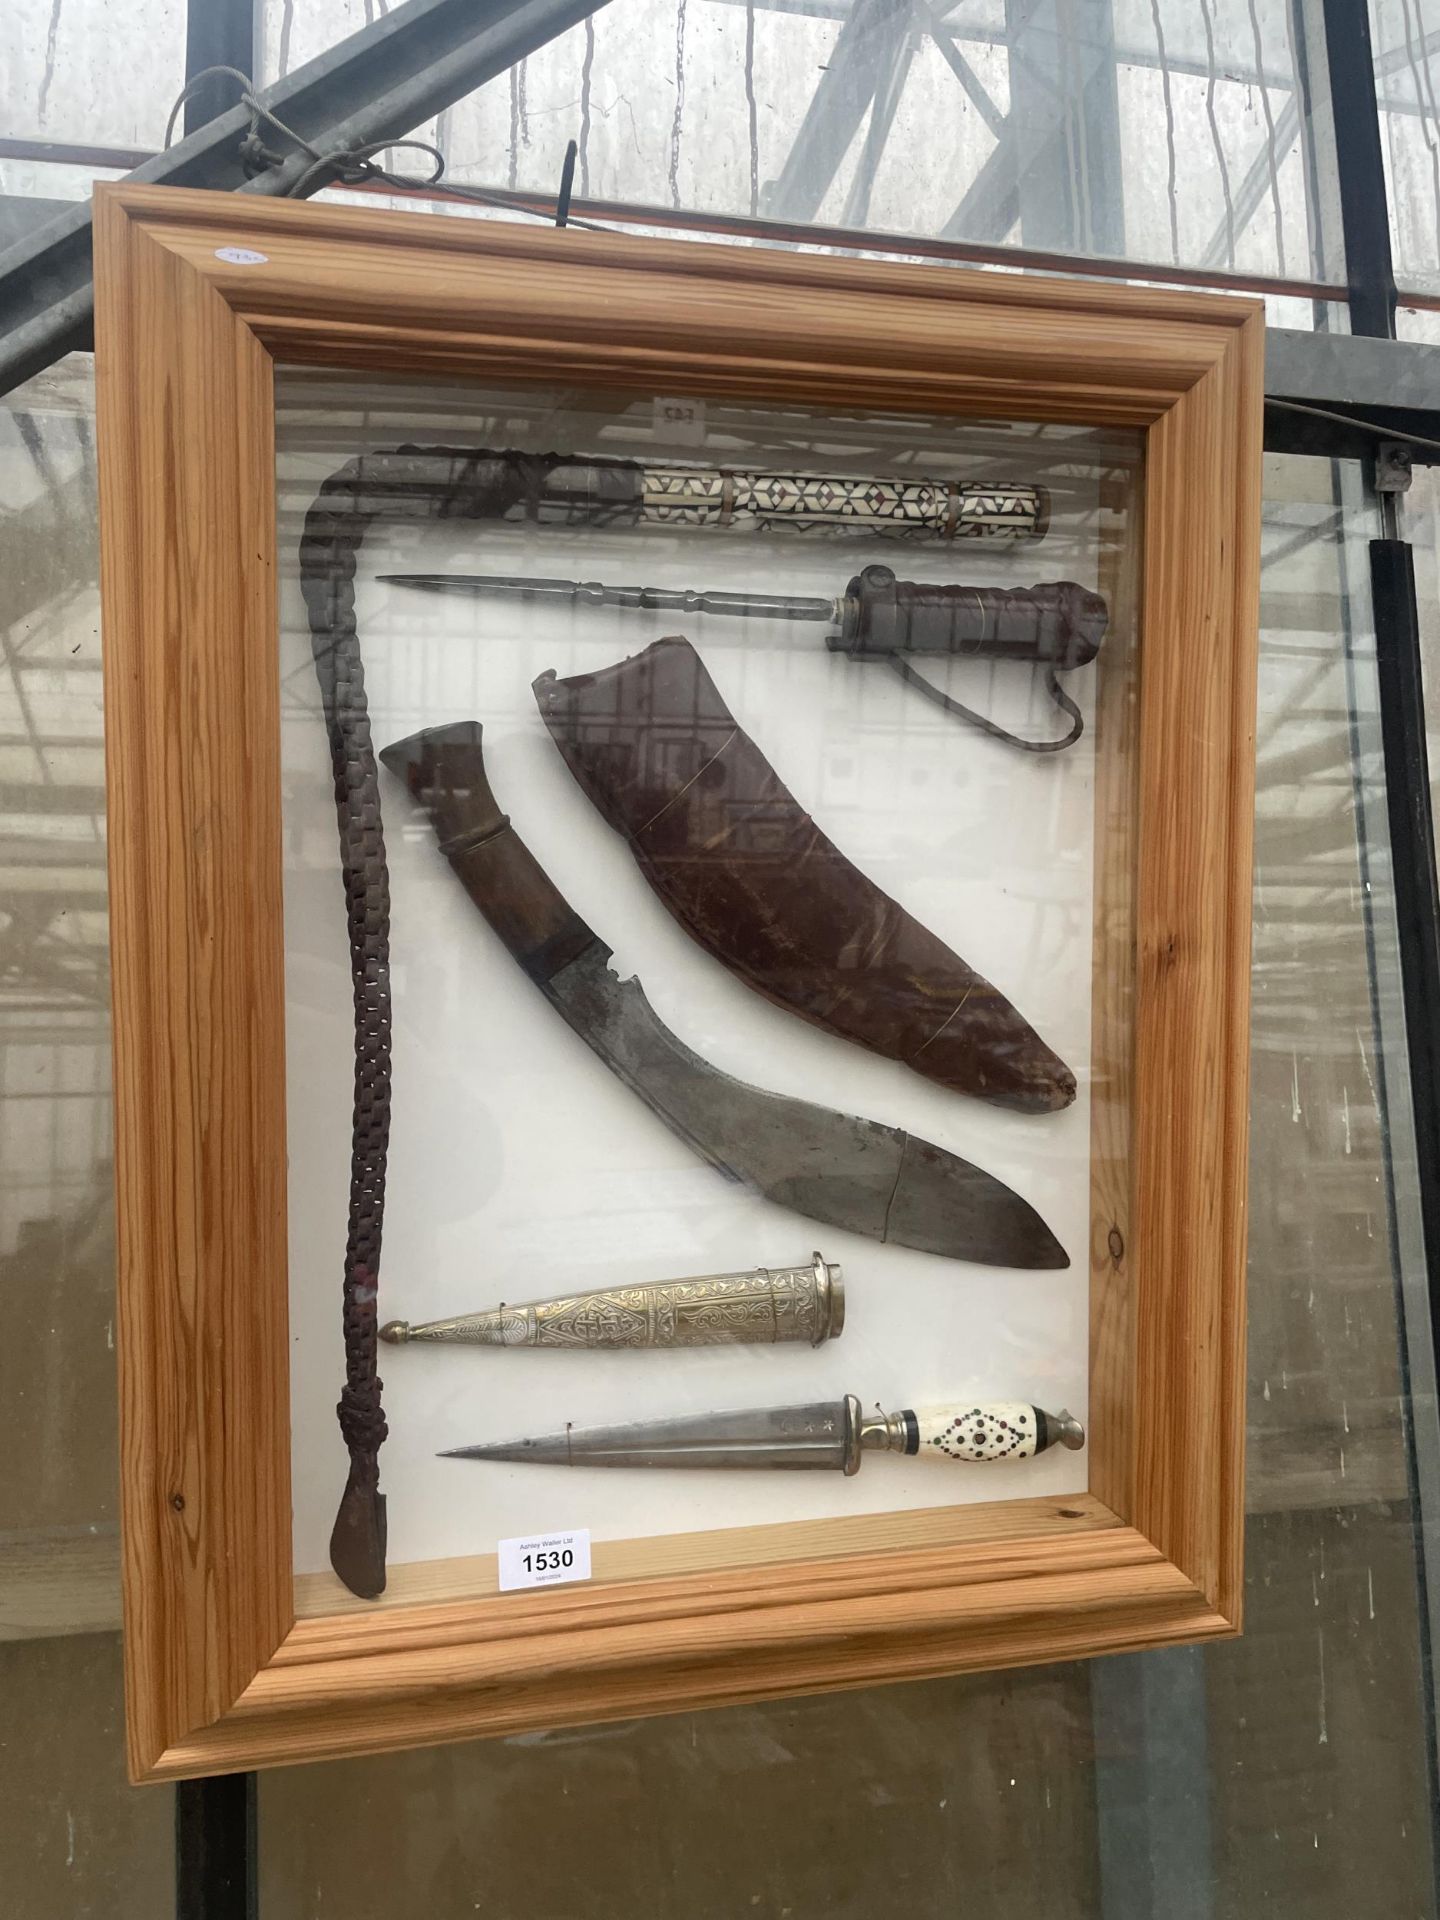 A PINE DISPLAY WALL HANGING FRAME WITH AN ASSORTMENT OF KNIVES